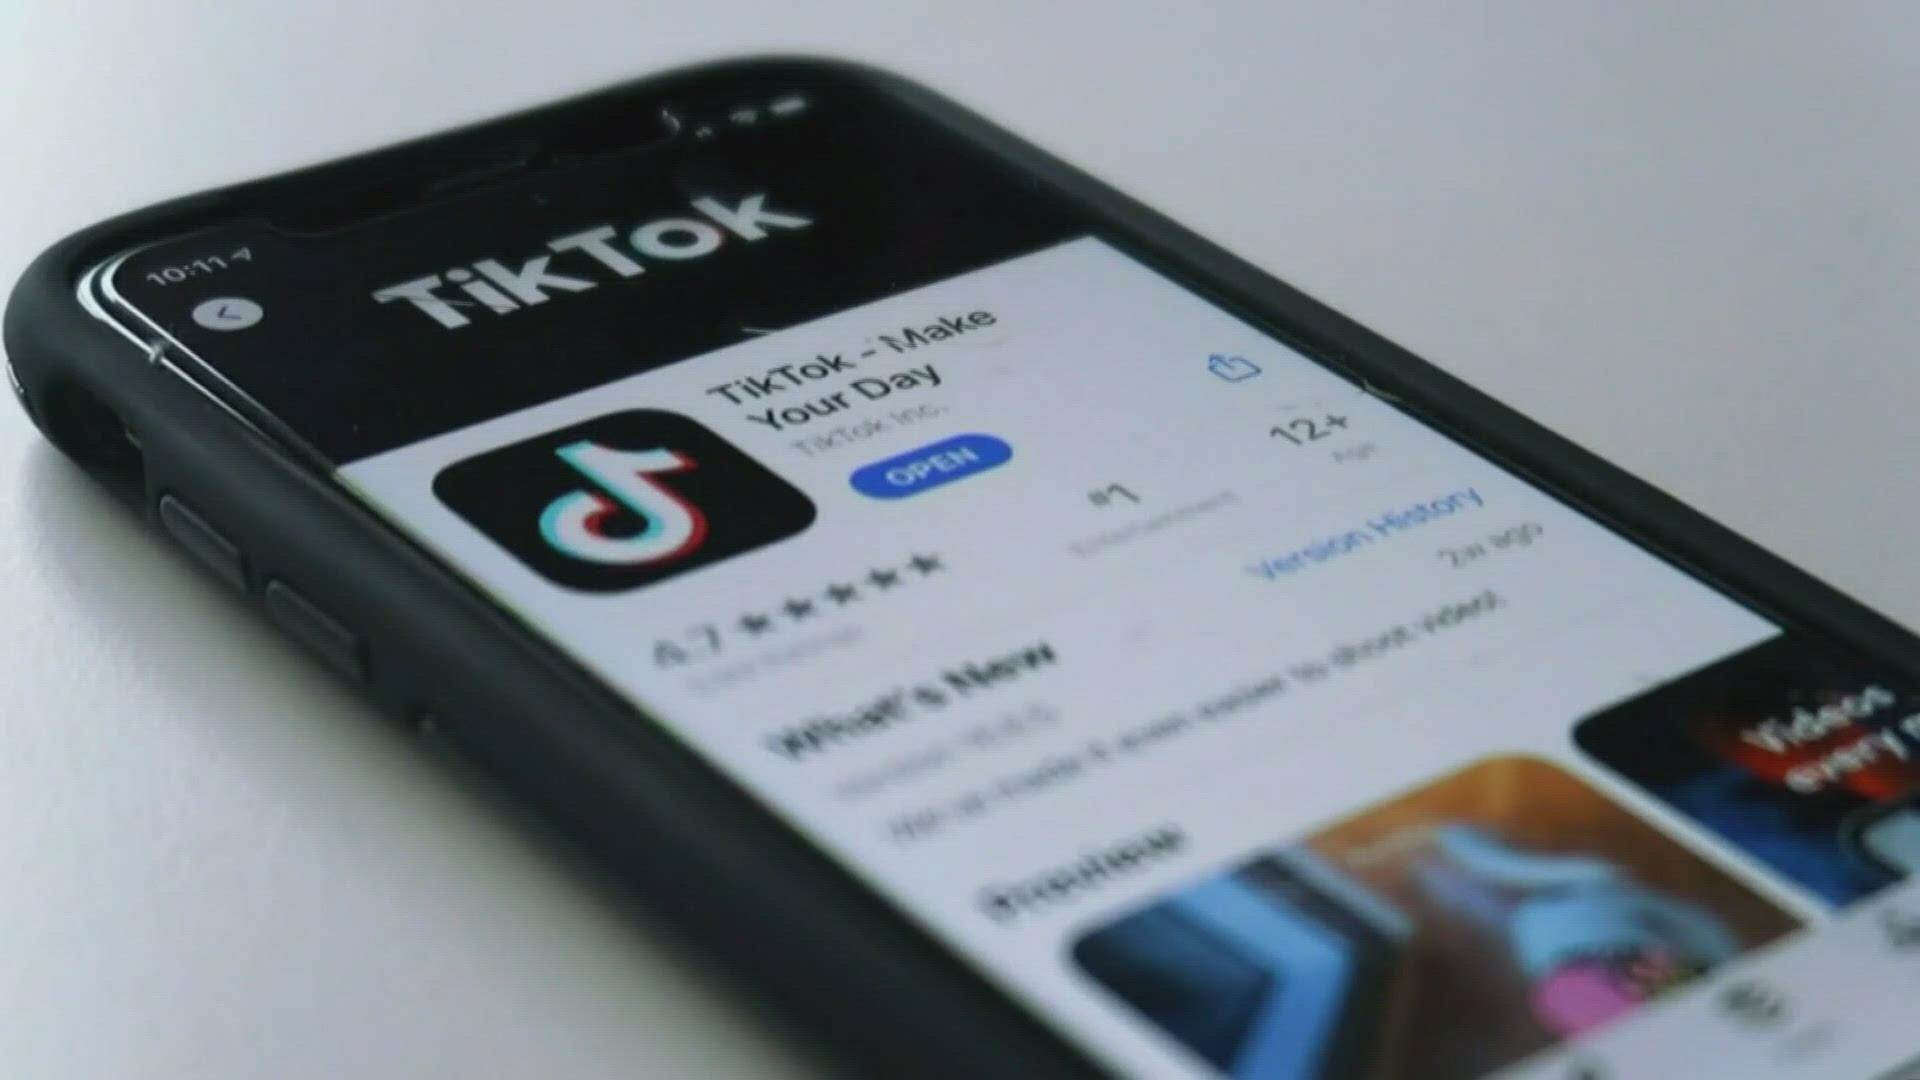 The bill was passed Wednesday morning with a majority 352 to 65, but the future of the app depends on whether or not TikTok's owner, ByteDance, refuses to sell.